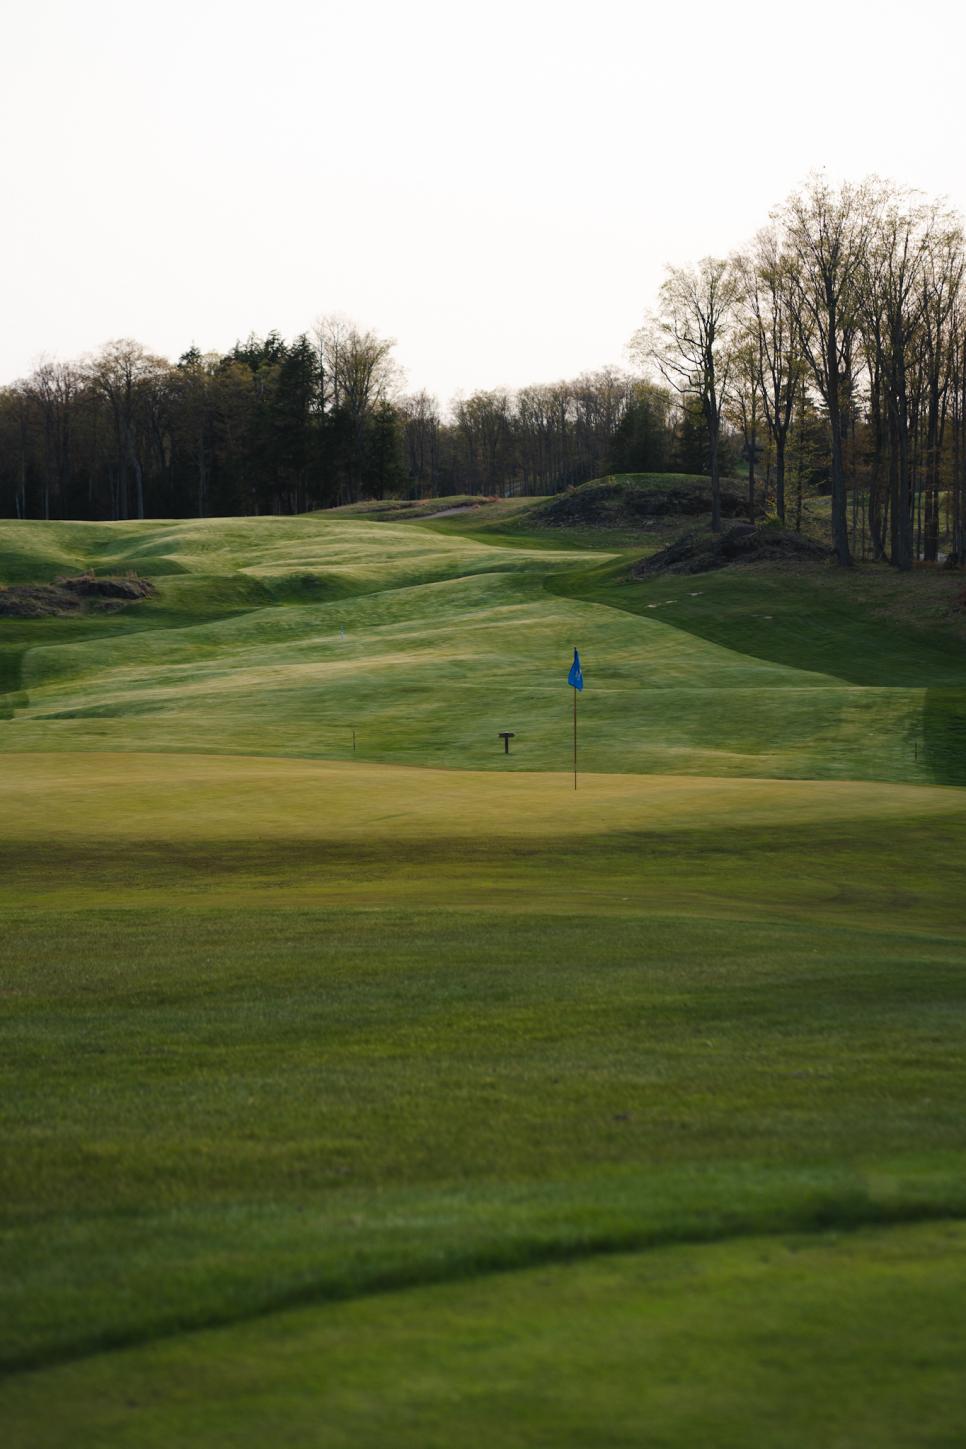 /content/dam/images/golfdigest/fullset/course-photos-for-places-to-play/Marquette-Golf-Club-Greywalls-Green-22806.jpg